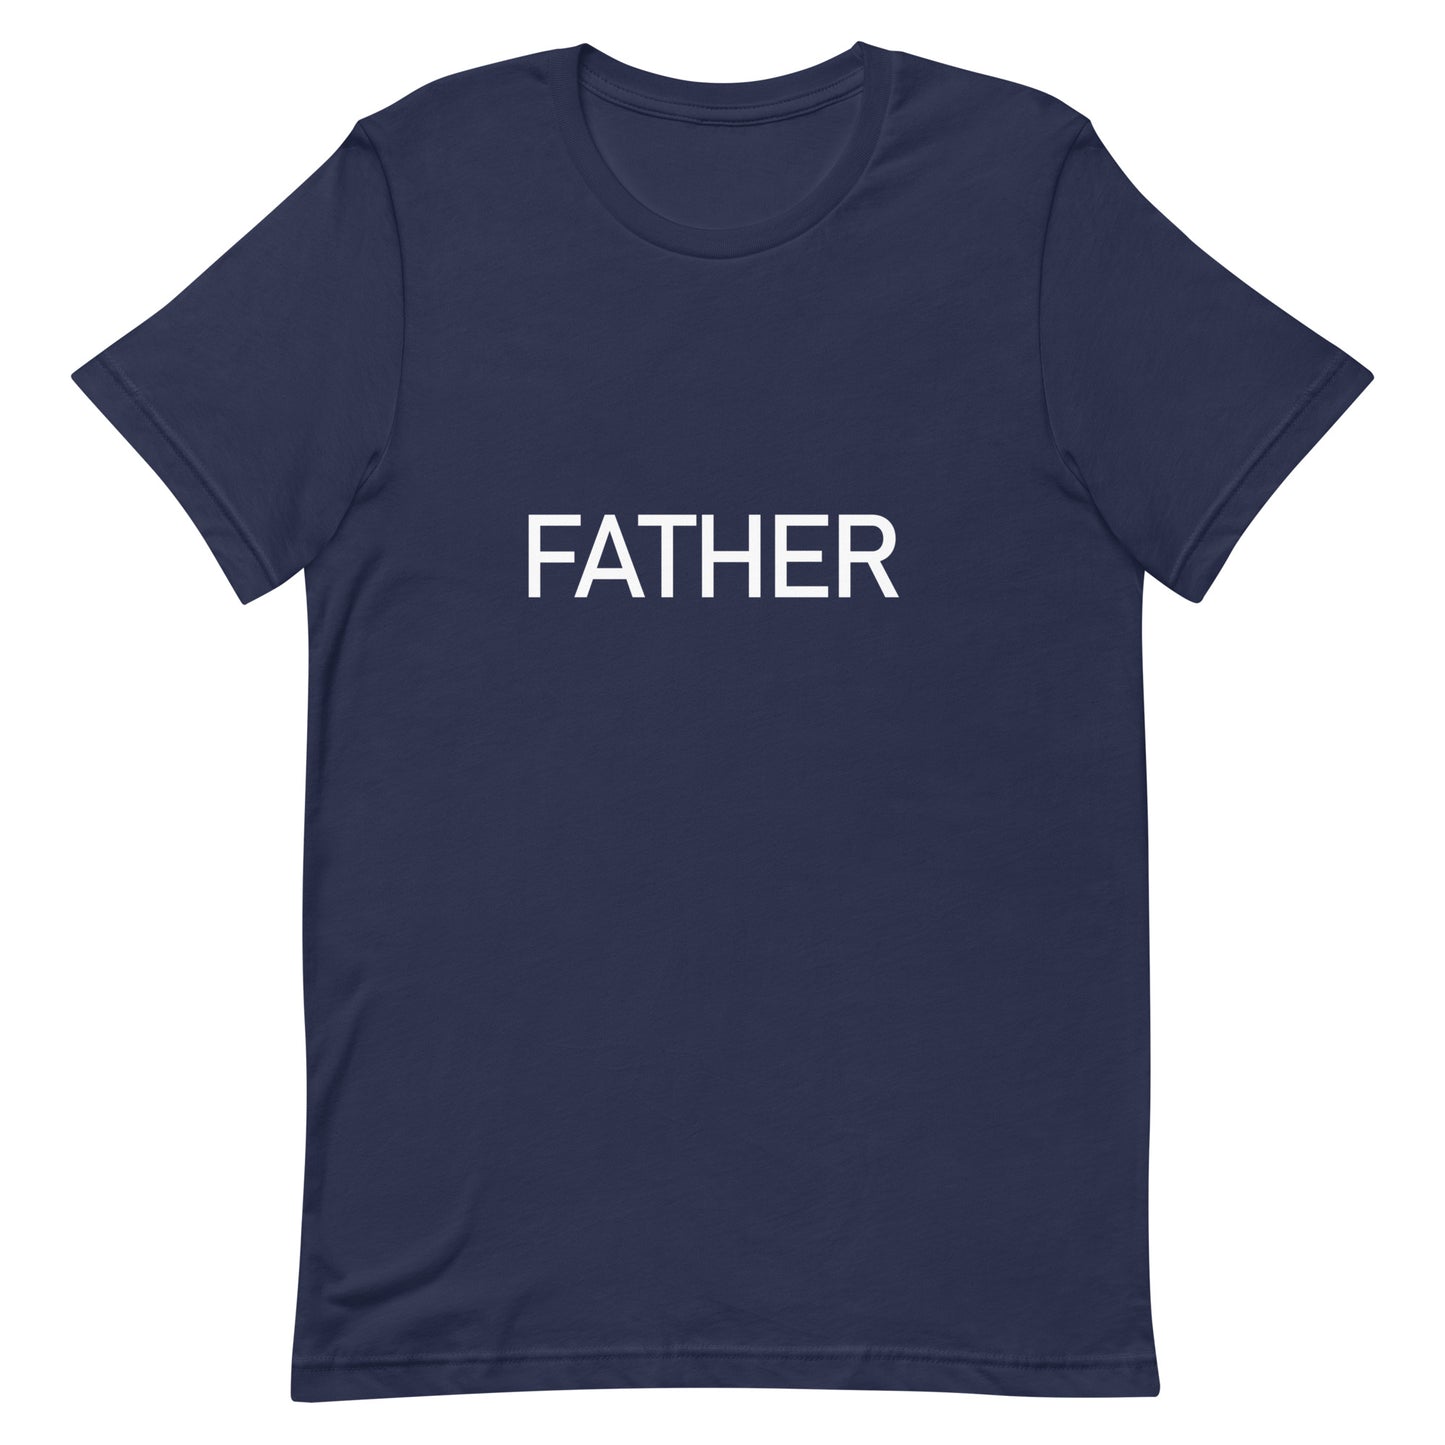 Father White - Sustainably Made Men’s Short Sleeve Tee